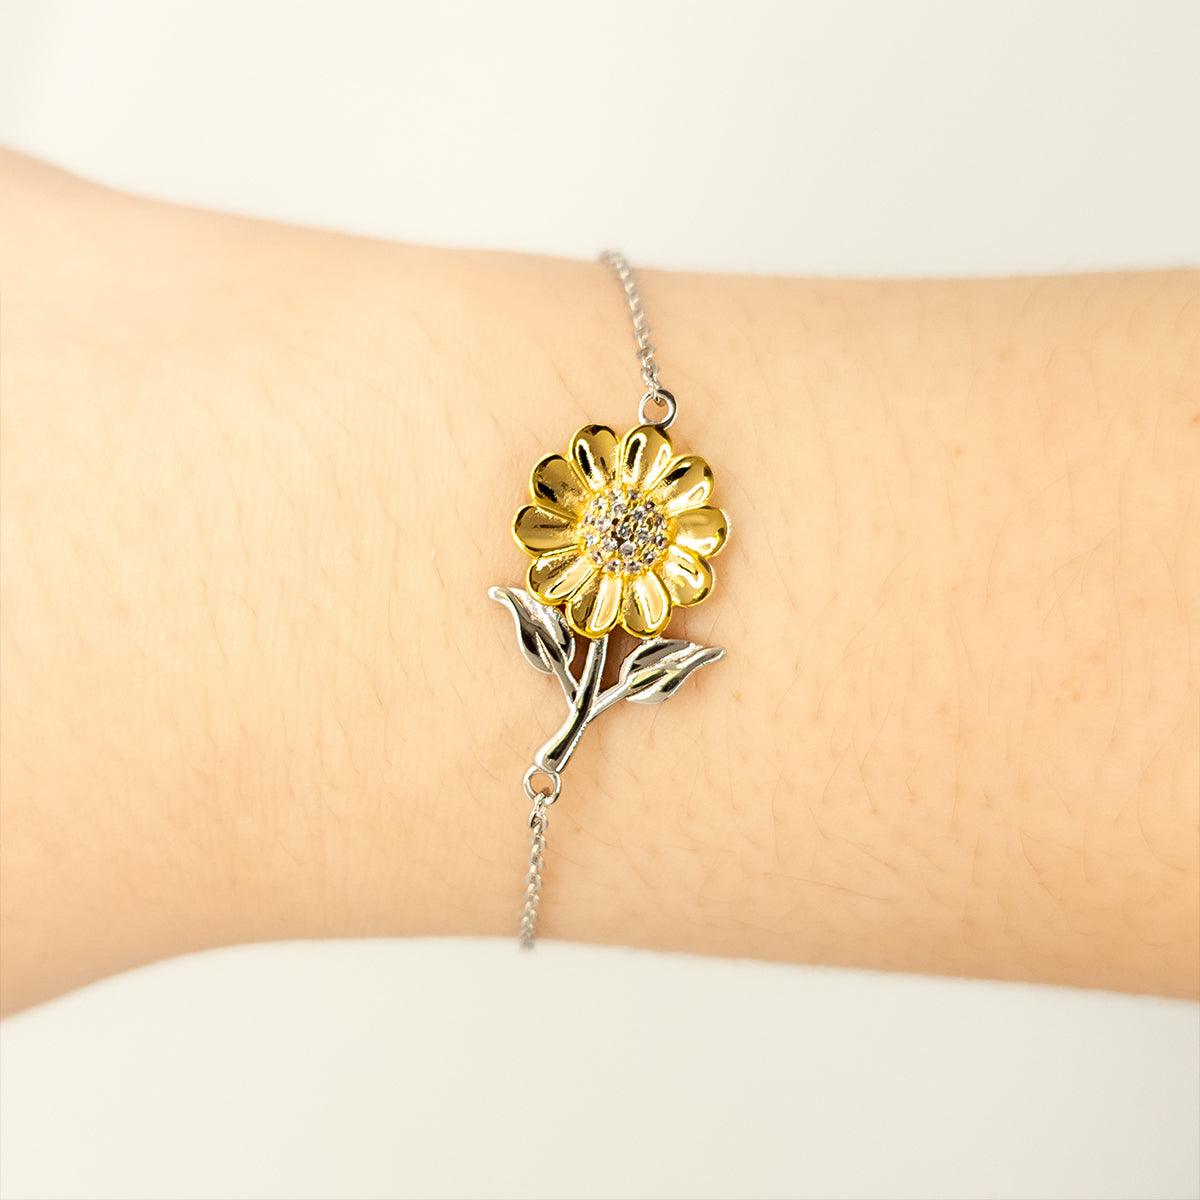 Remarkable Court Reporter Gifts, Your dedication and hard work, Inspirational Birthday Christmas Unique Sunflower Bracelet For Court Reporter, Coworkers, Men, Women, Friends - Mallard Moon Gift Shop